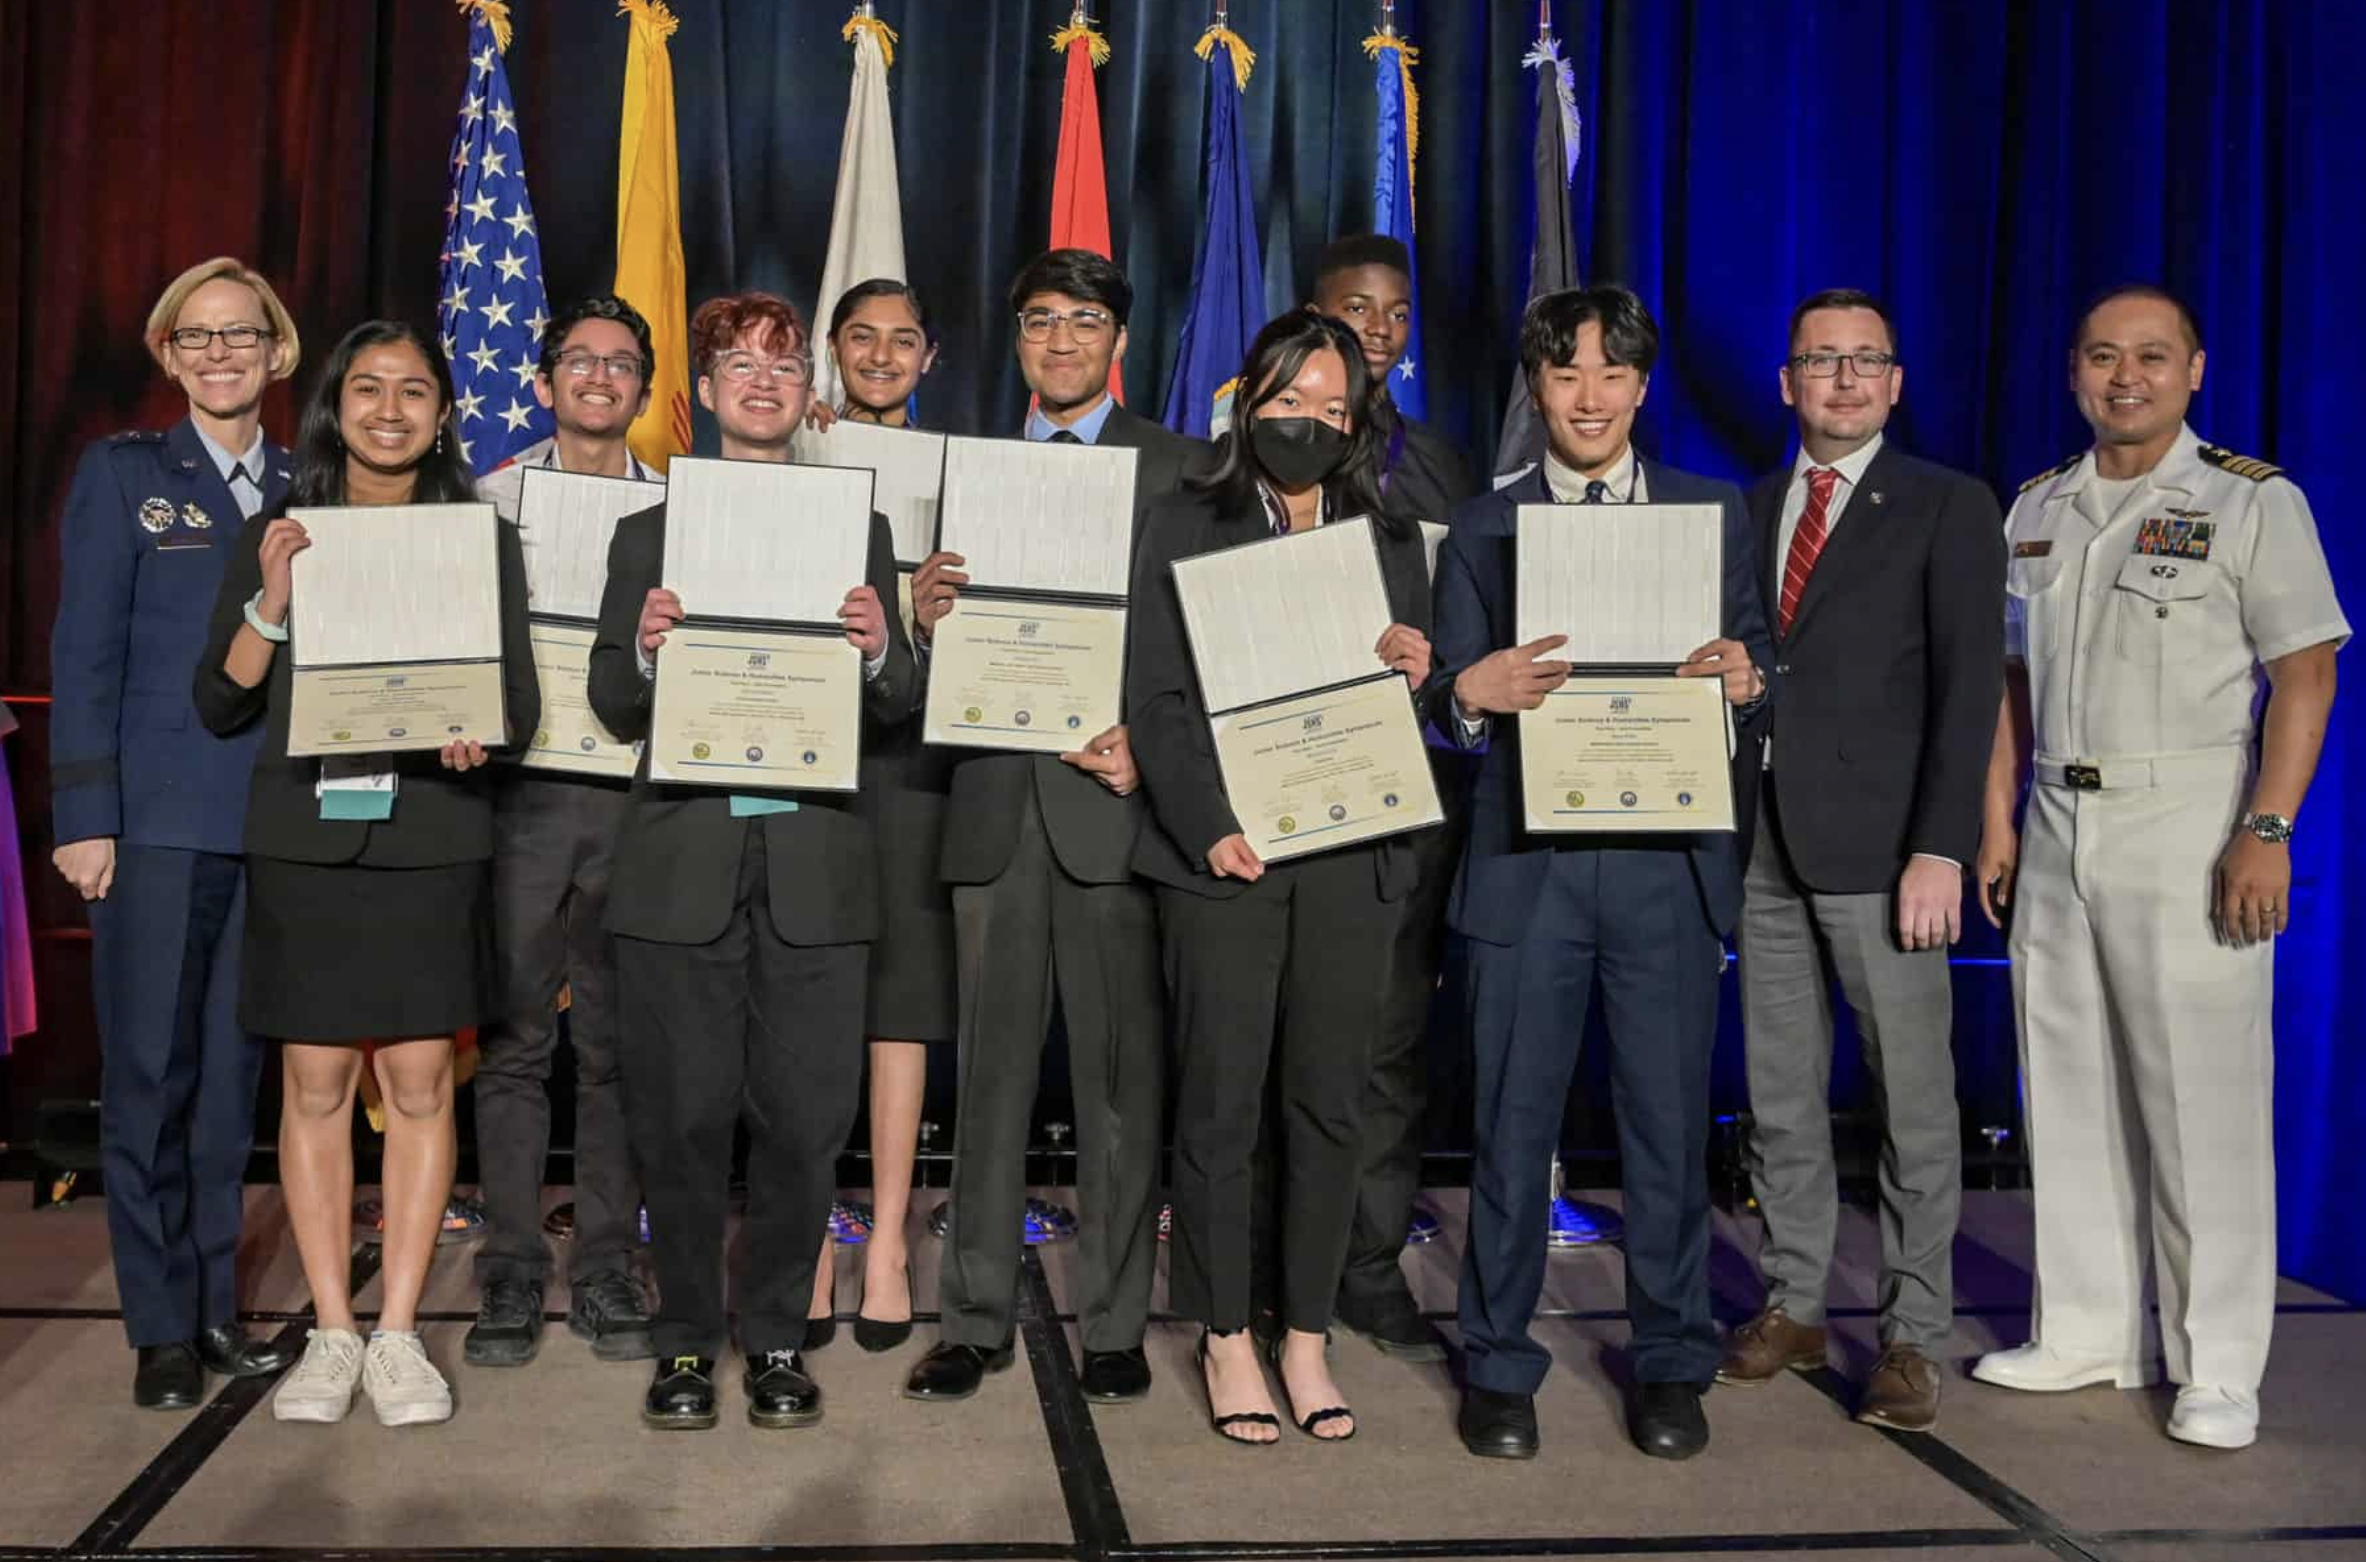 Okezue honored by the department of defense for excellence in engineering in Albuquerque, New Mexico